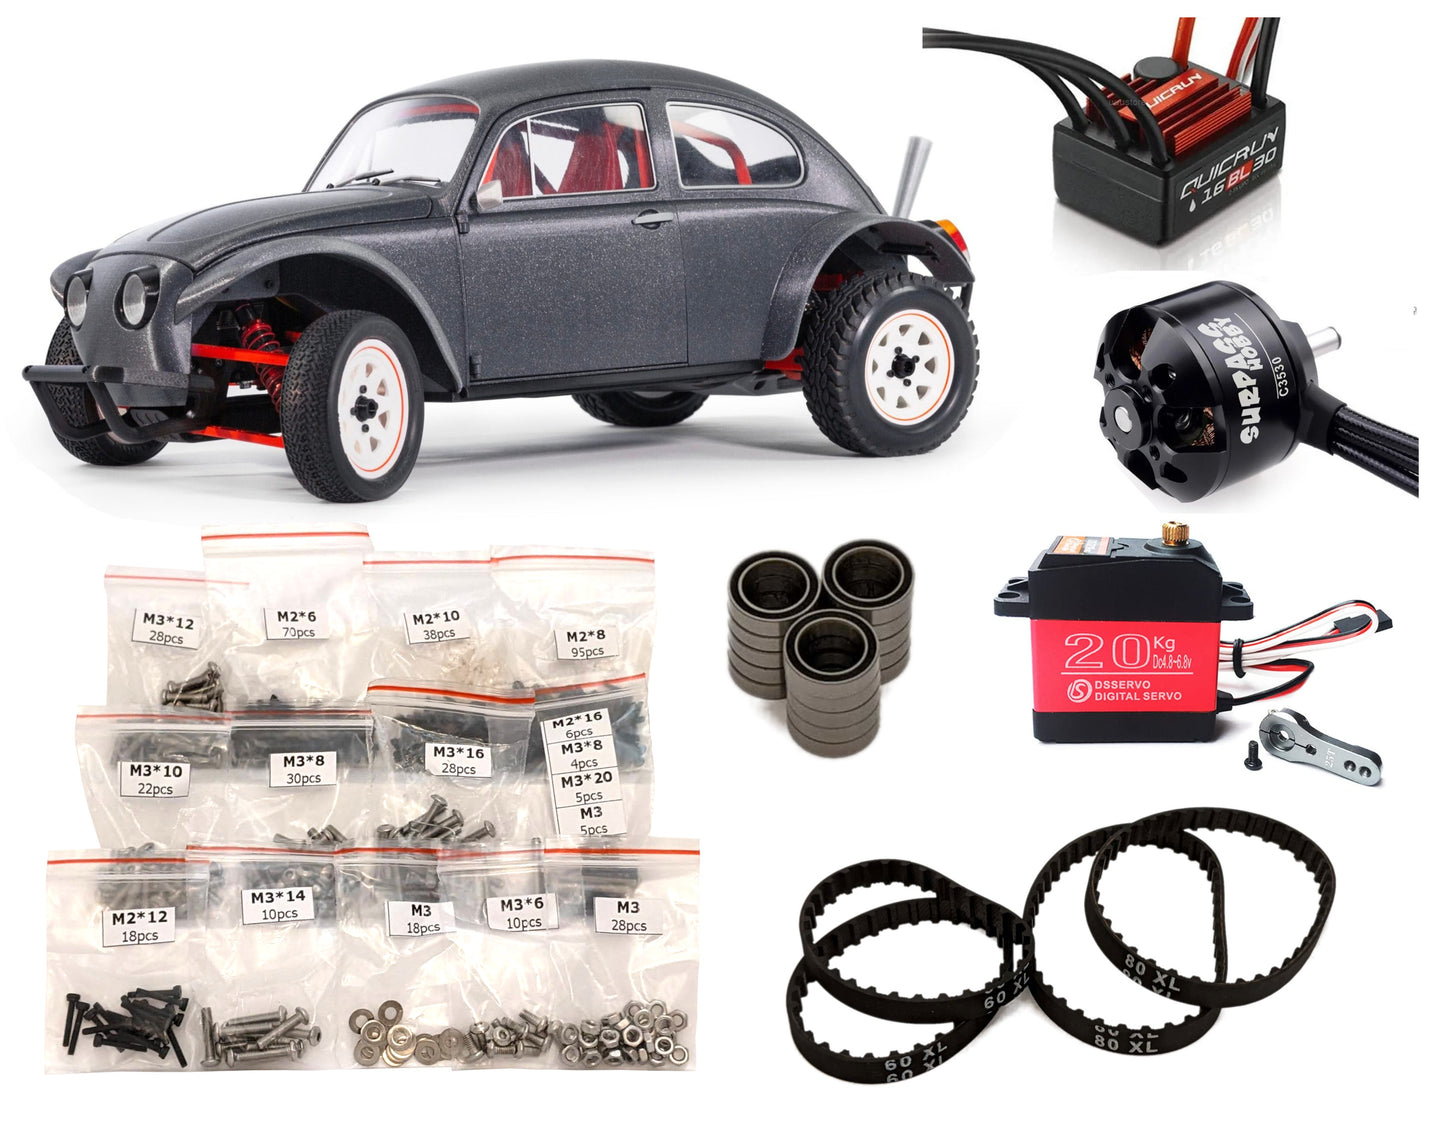 3DSets Buggy Build Kits